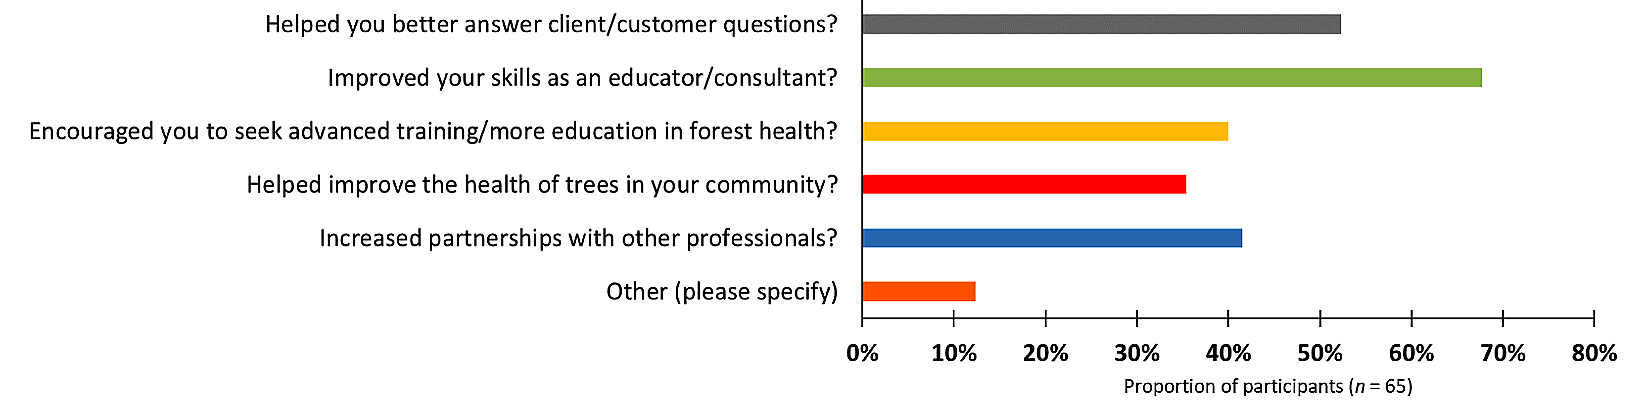 Responses from Participants When Asked 